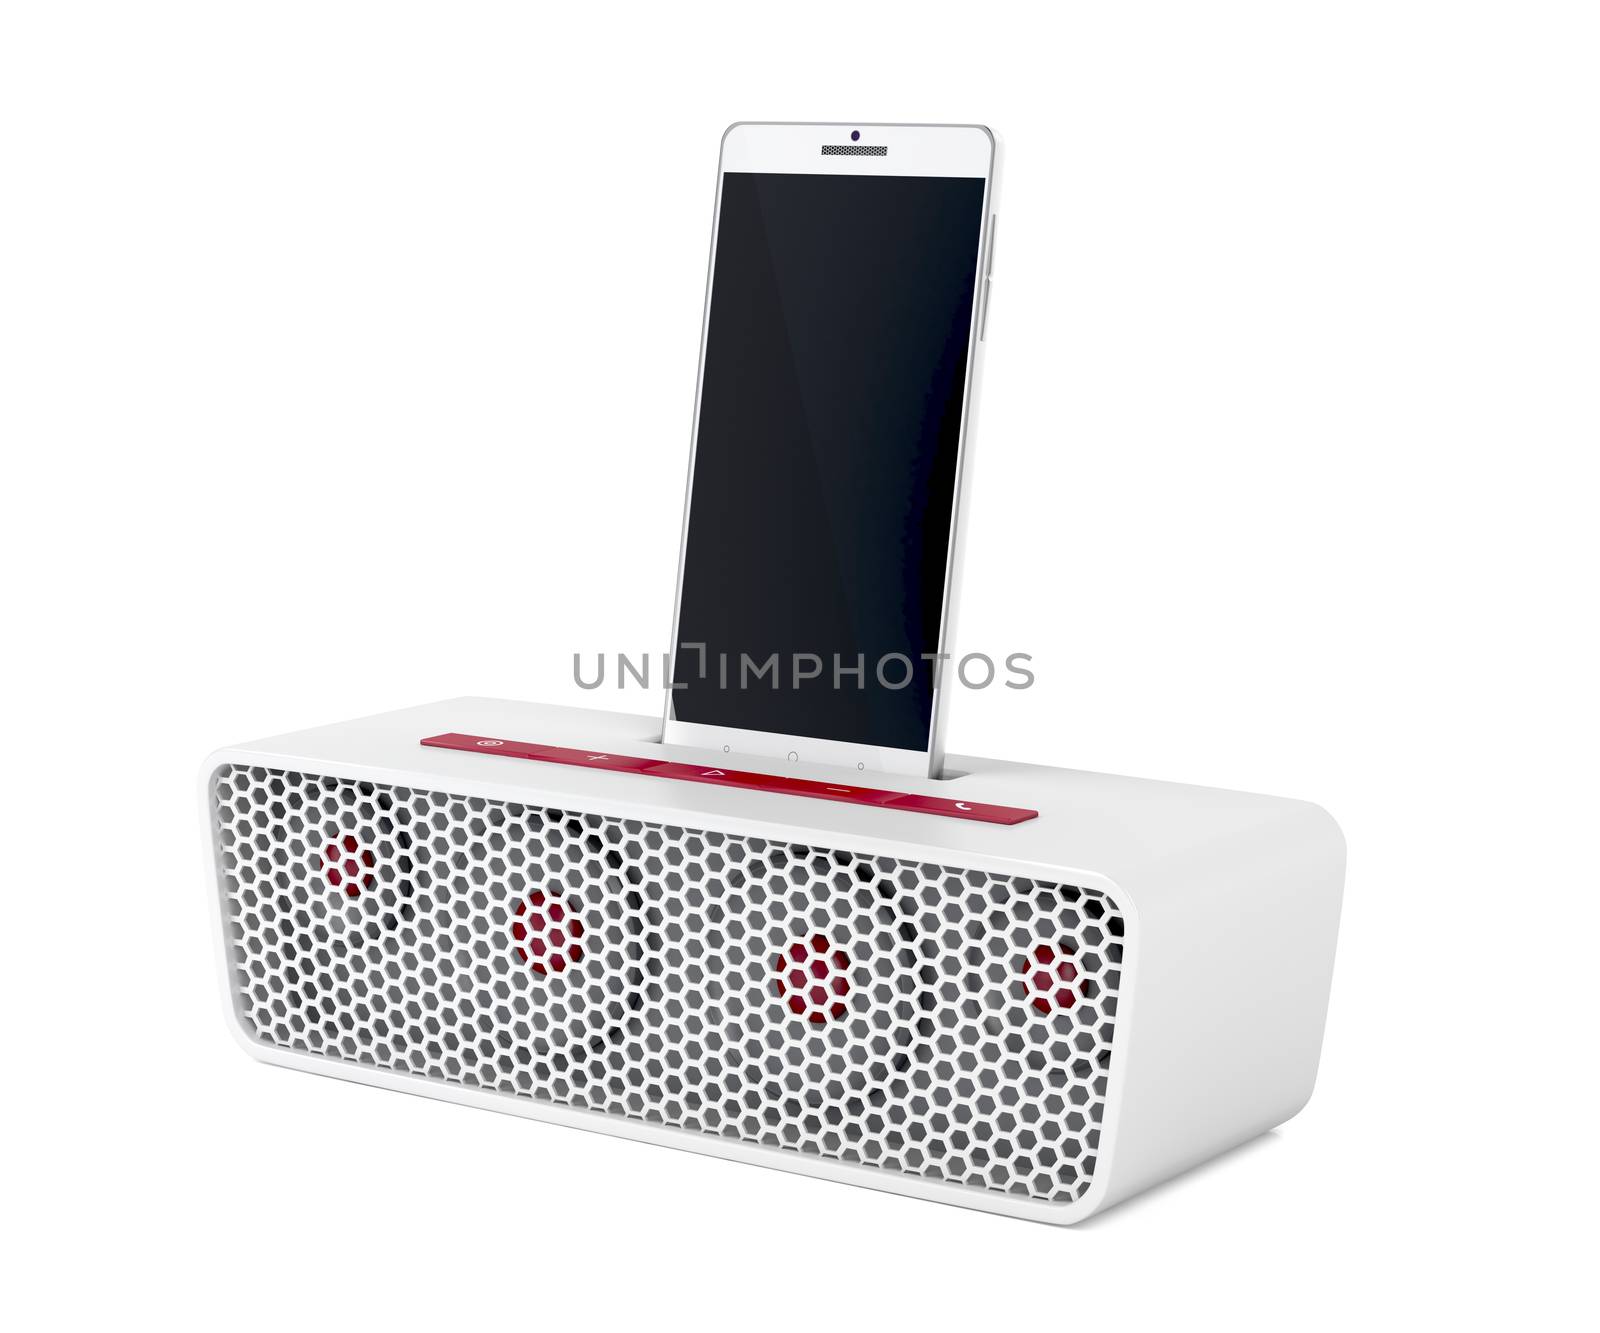 Docking station speaker and smartphone by magraphics